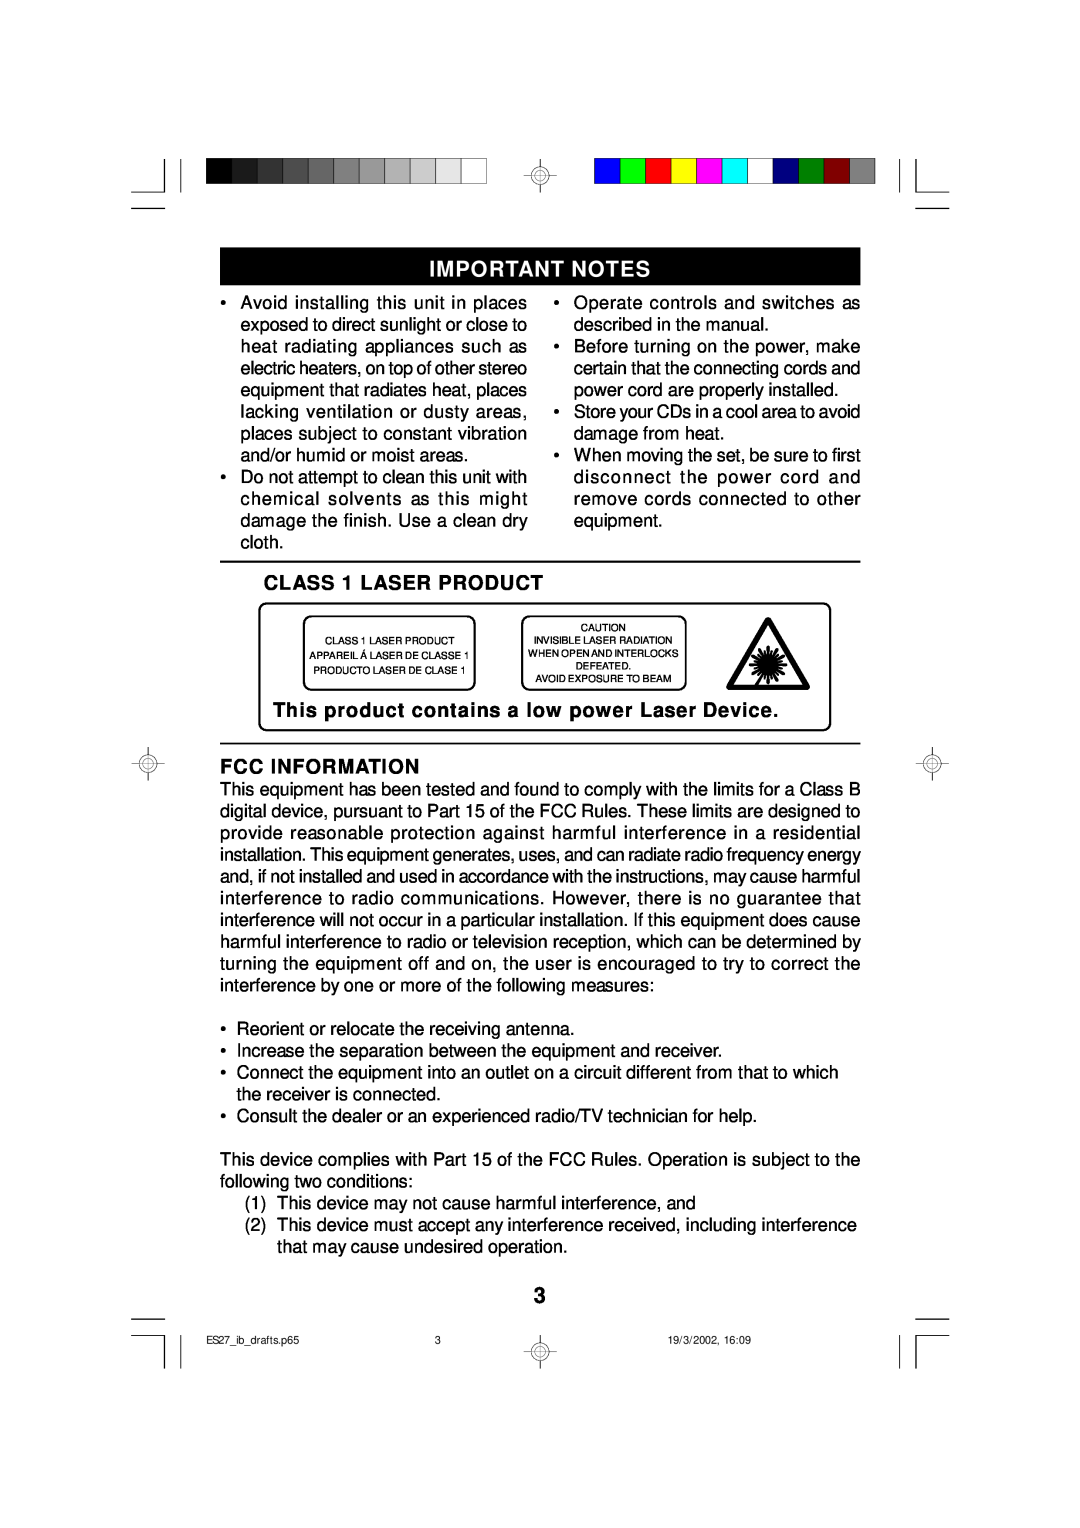 Emerson ES27 Important Notes, CLASS 1 LASER PRODUCT, This product contains a low power Laser Device, Fcc Information 